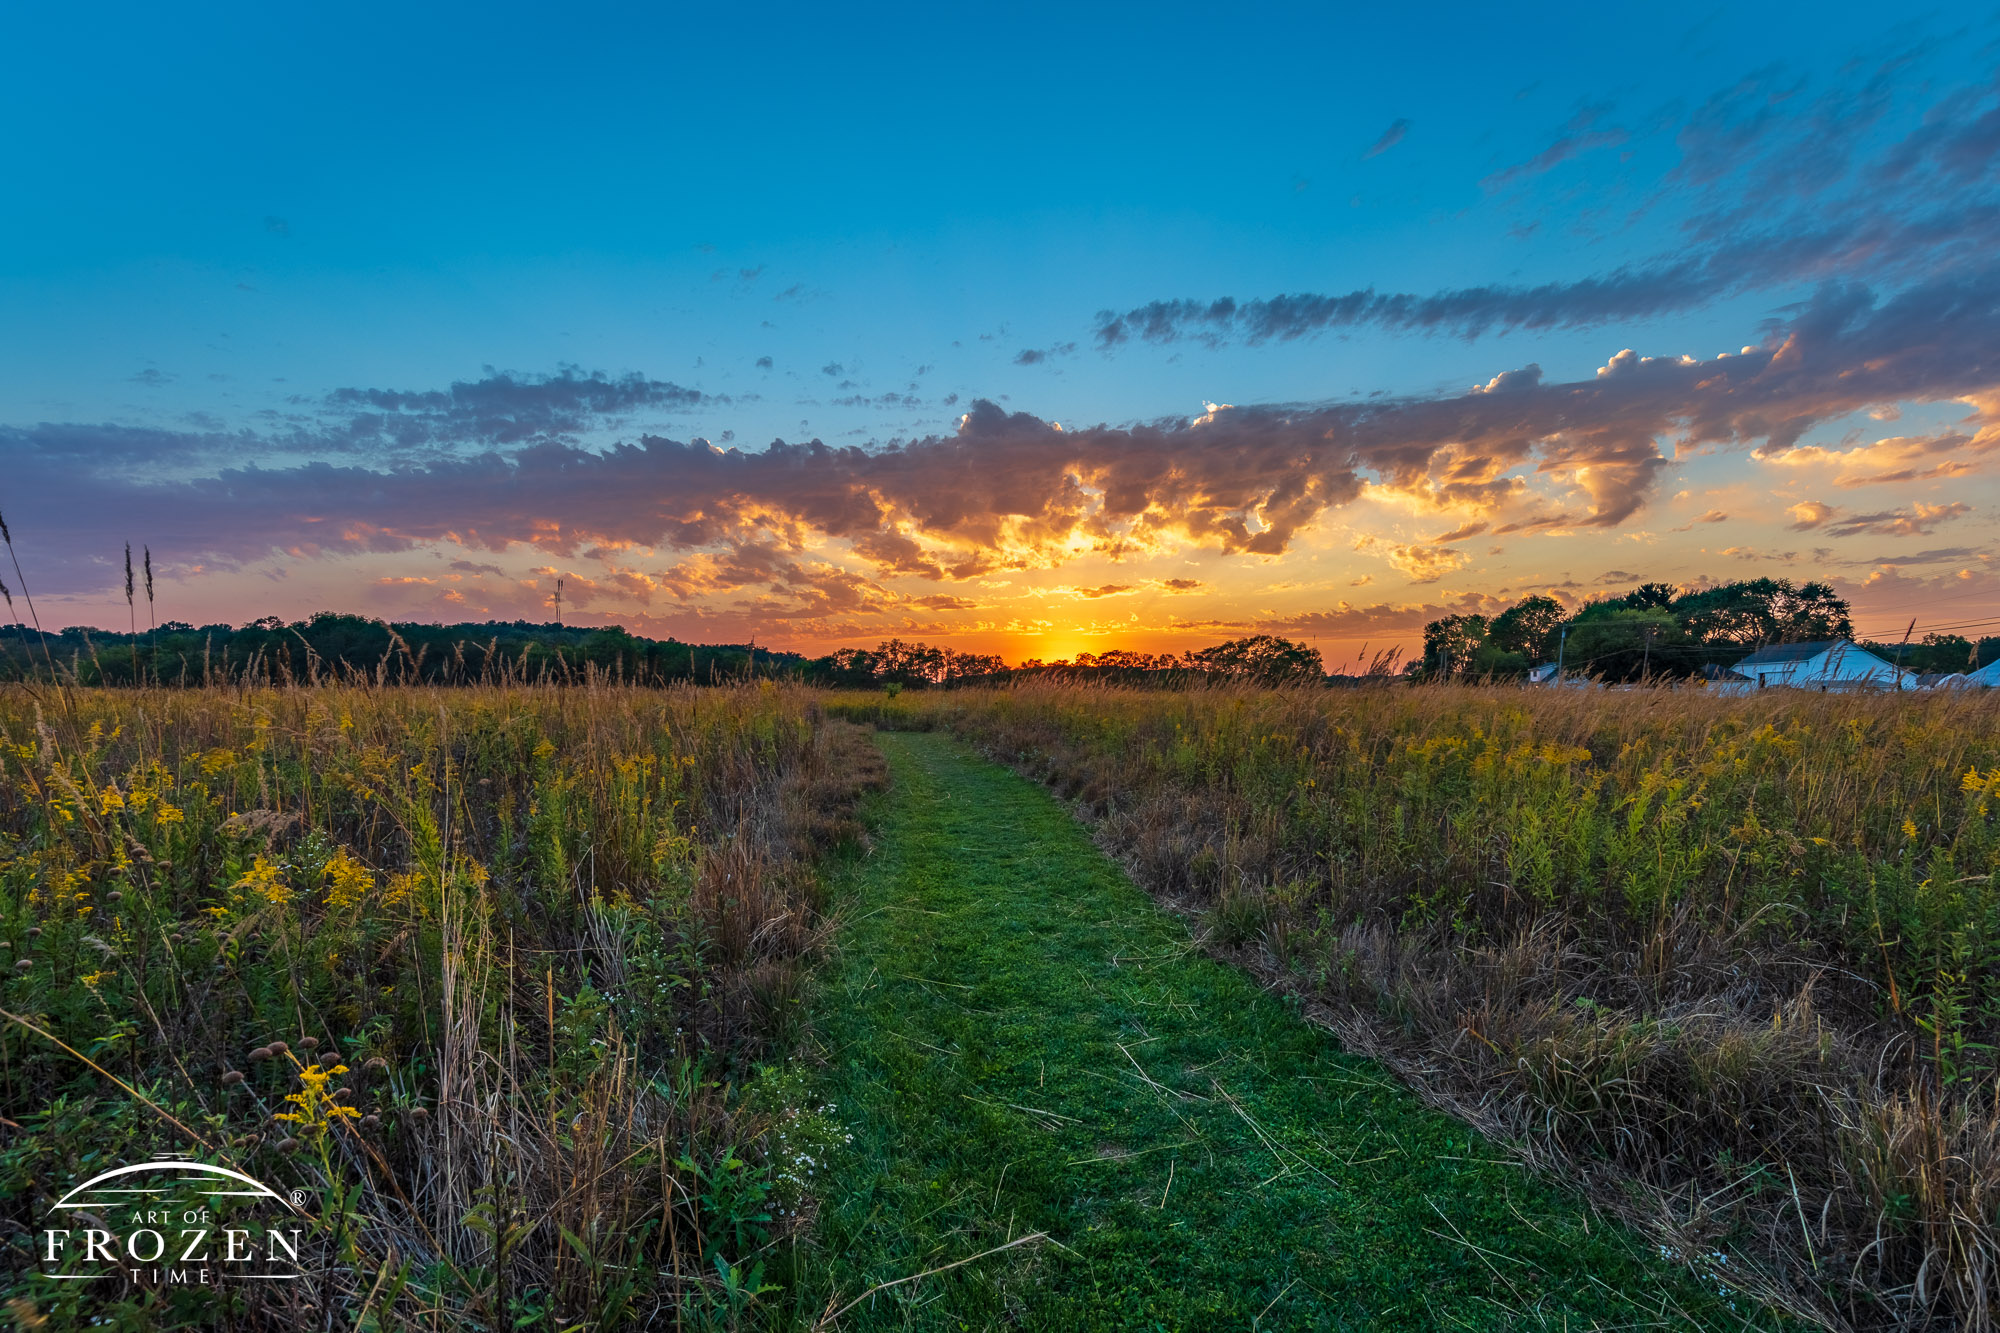 A trail through a tall grass prairie hosting golden rods during a colorful sunset